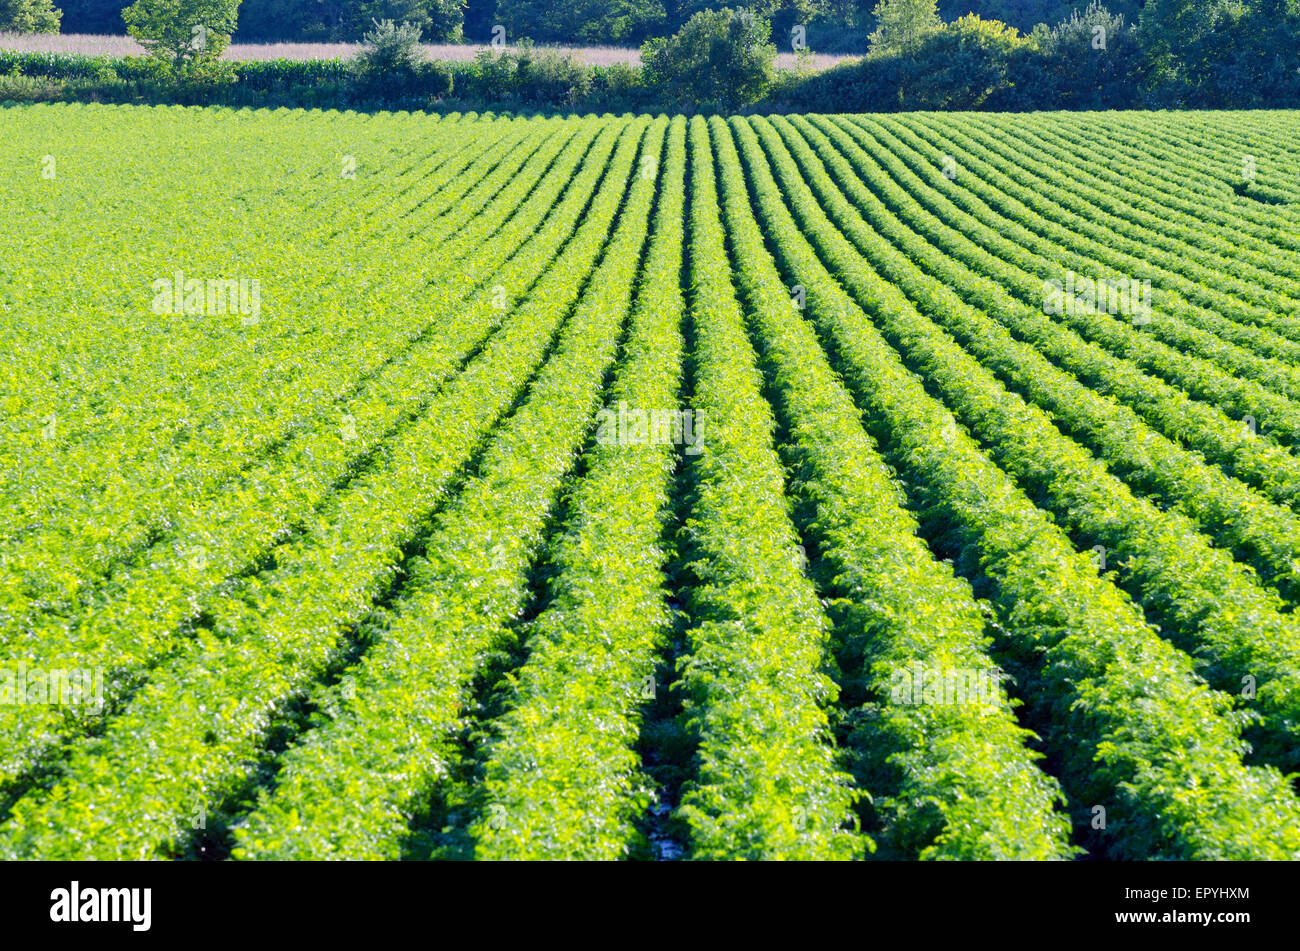 Rows on green plant on farm field. Stock Photo